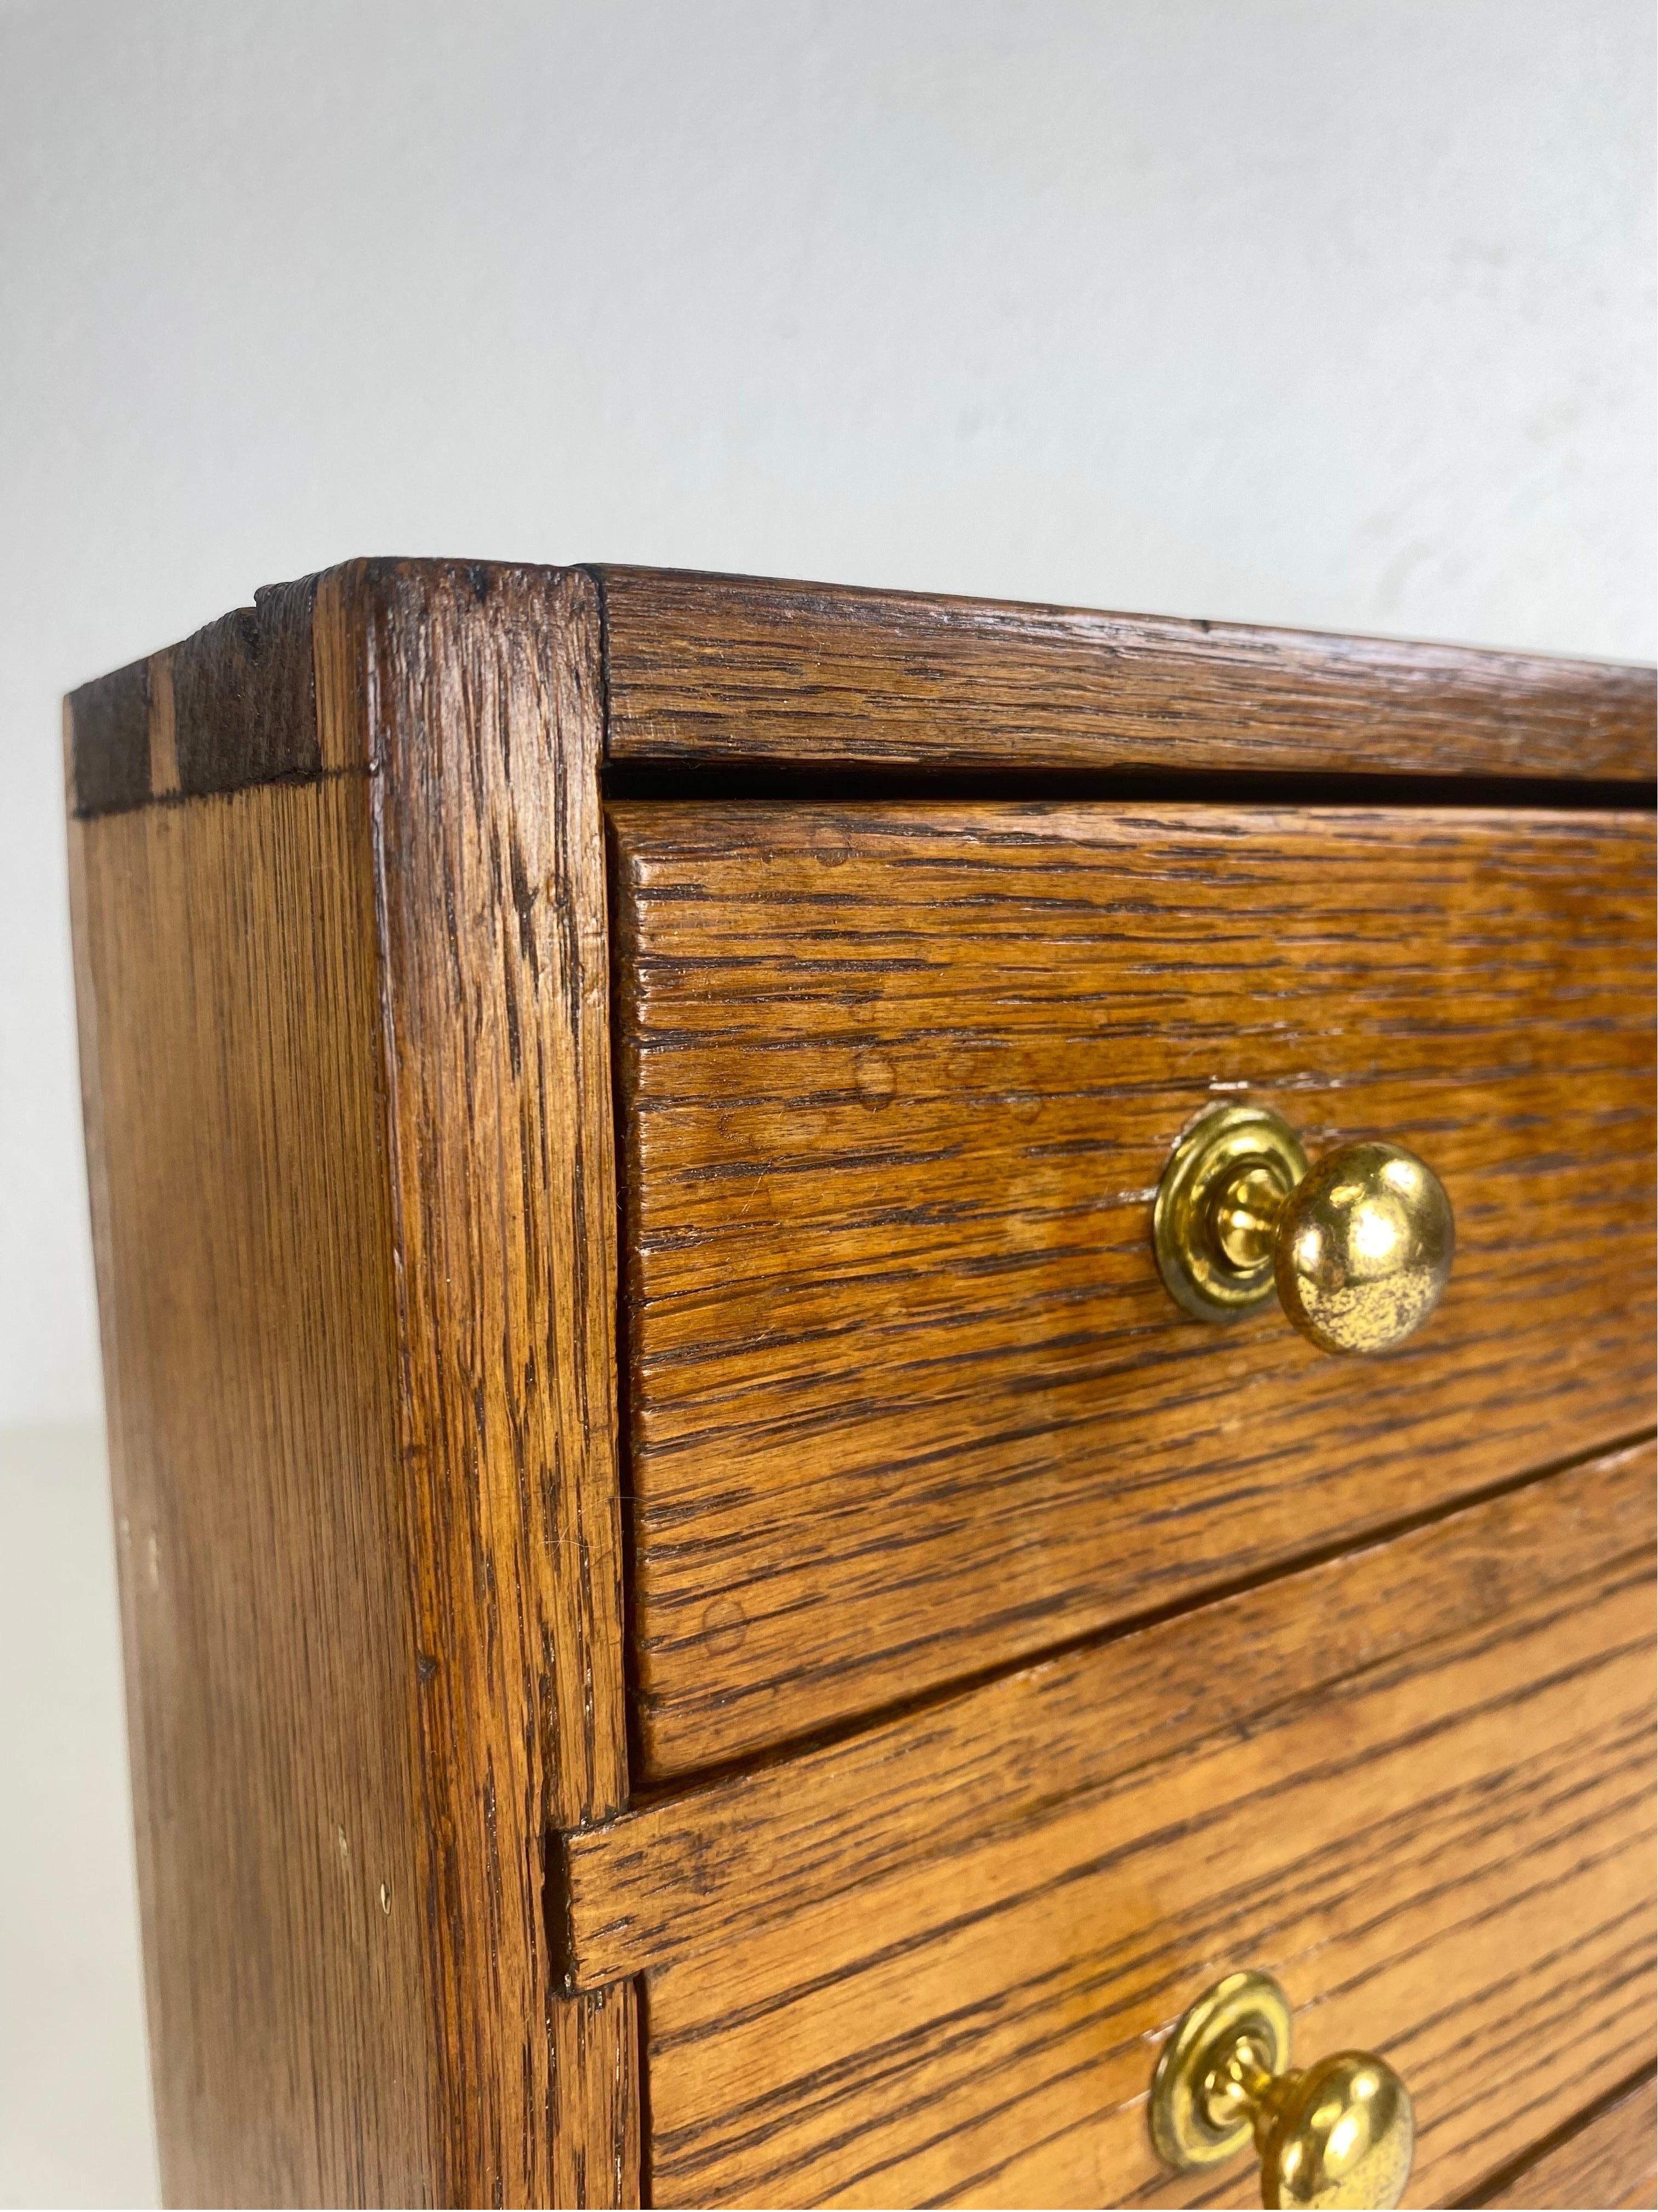 This is an antique handmade solid oak miniature Chester drawers. This dresser top chest of drawers has its original solid brass hardware. This handmade piece has dovetailing at the top of the chest, as well as the interior of the drawers. This piece